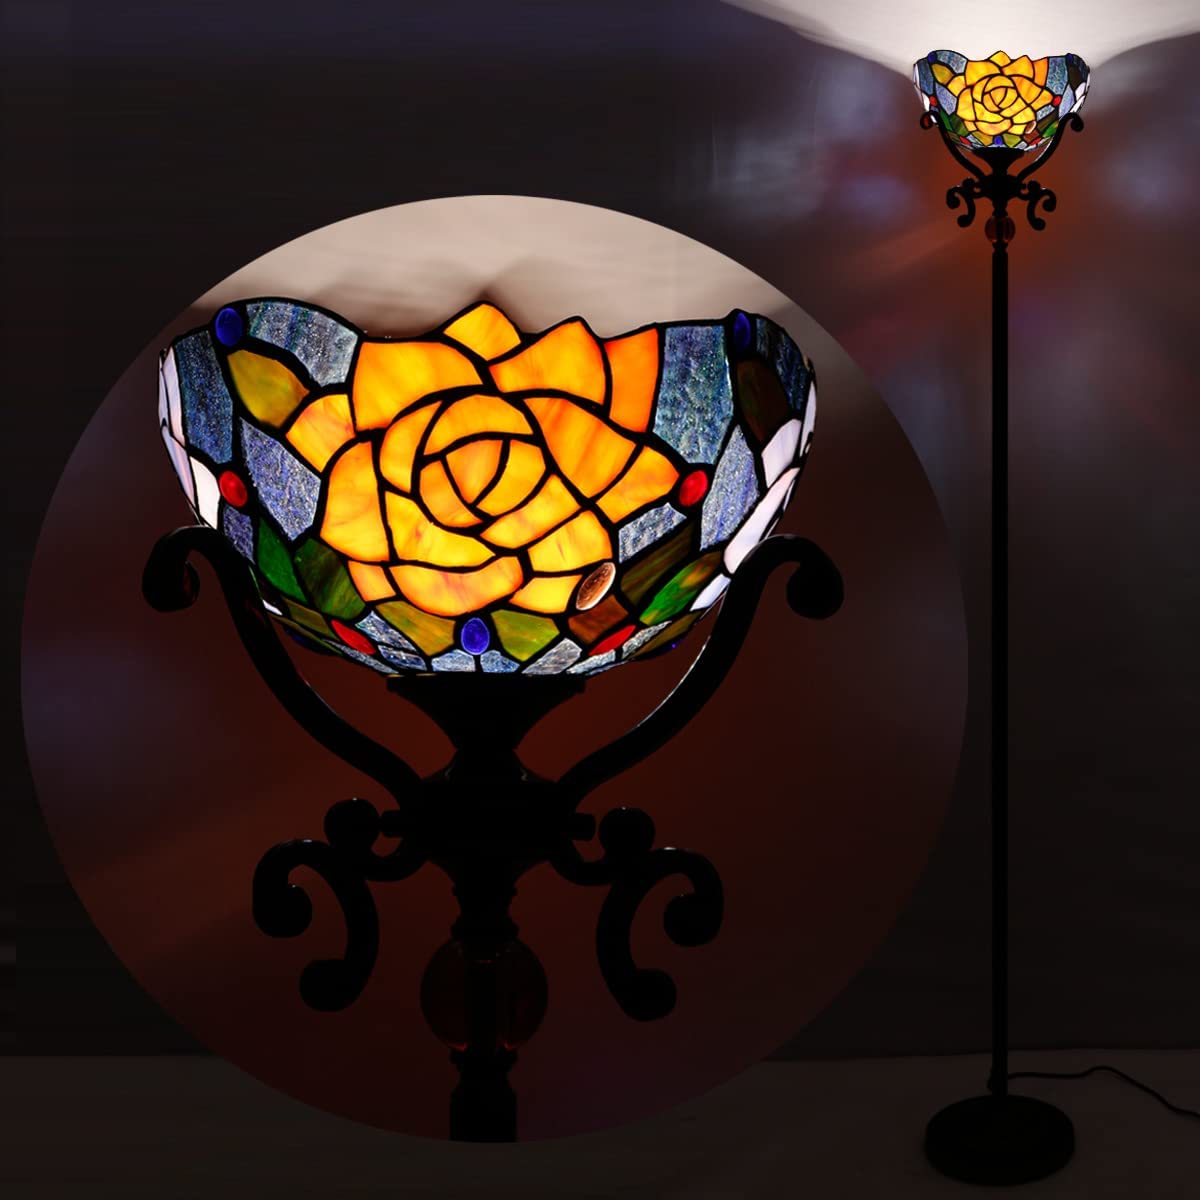 Tiffany Floor Lamp Stained Glass Red Rose Torchiere Light W10H70 Inch Antique Style